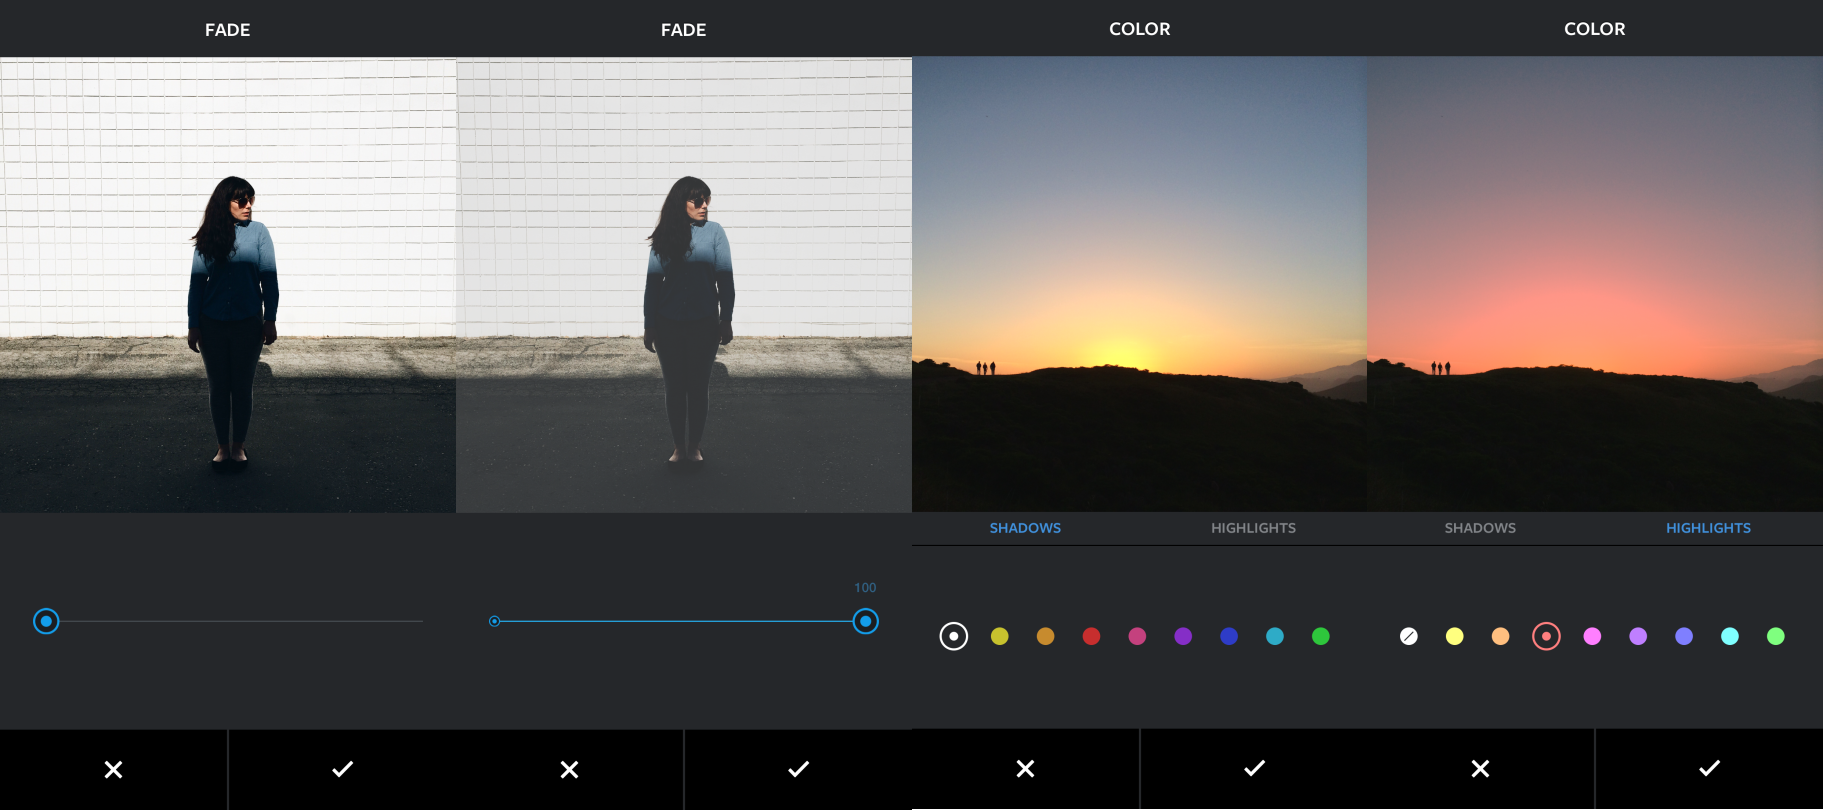 Instagram Color and Fade